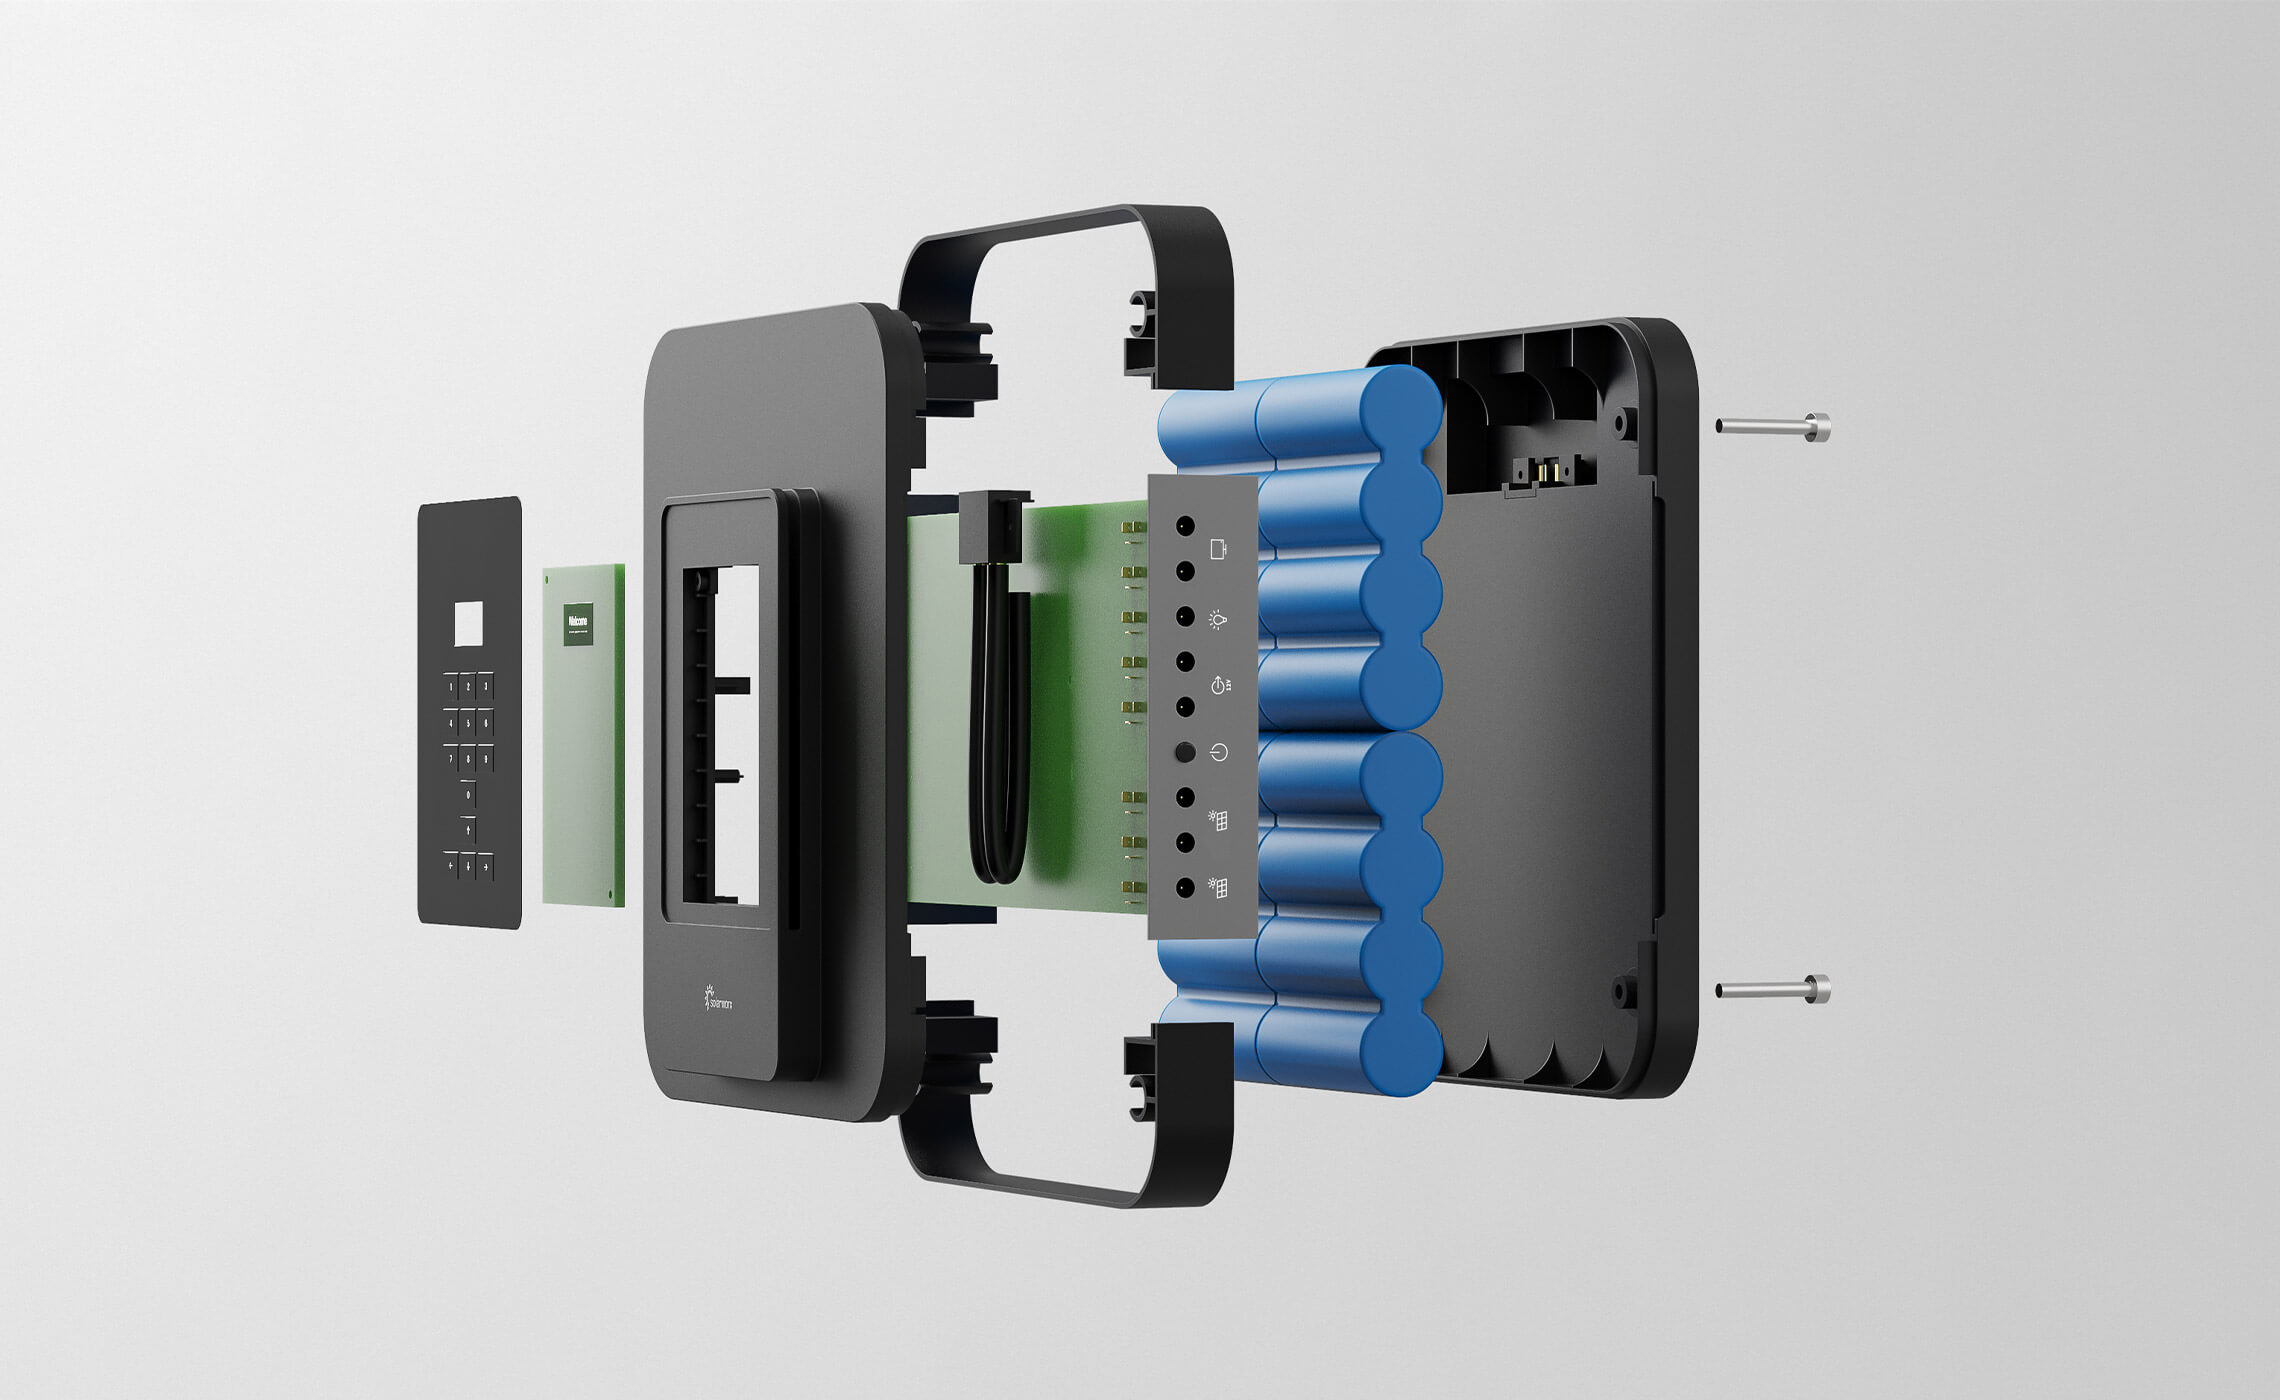 This picture shows an exploded view of the Solego case.